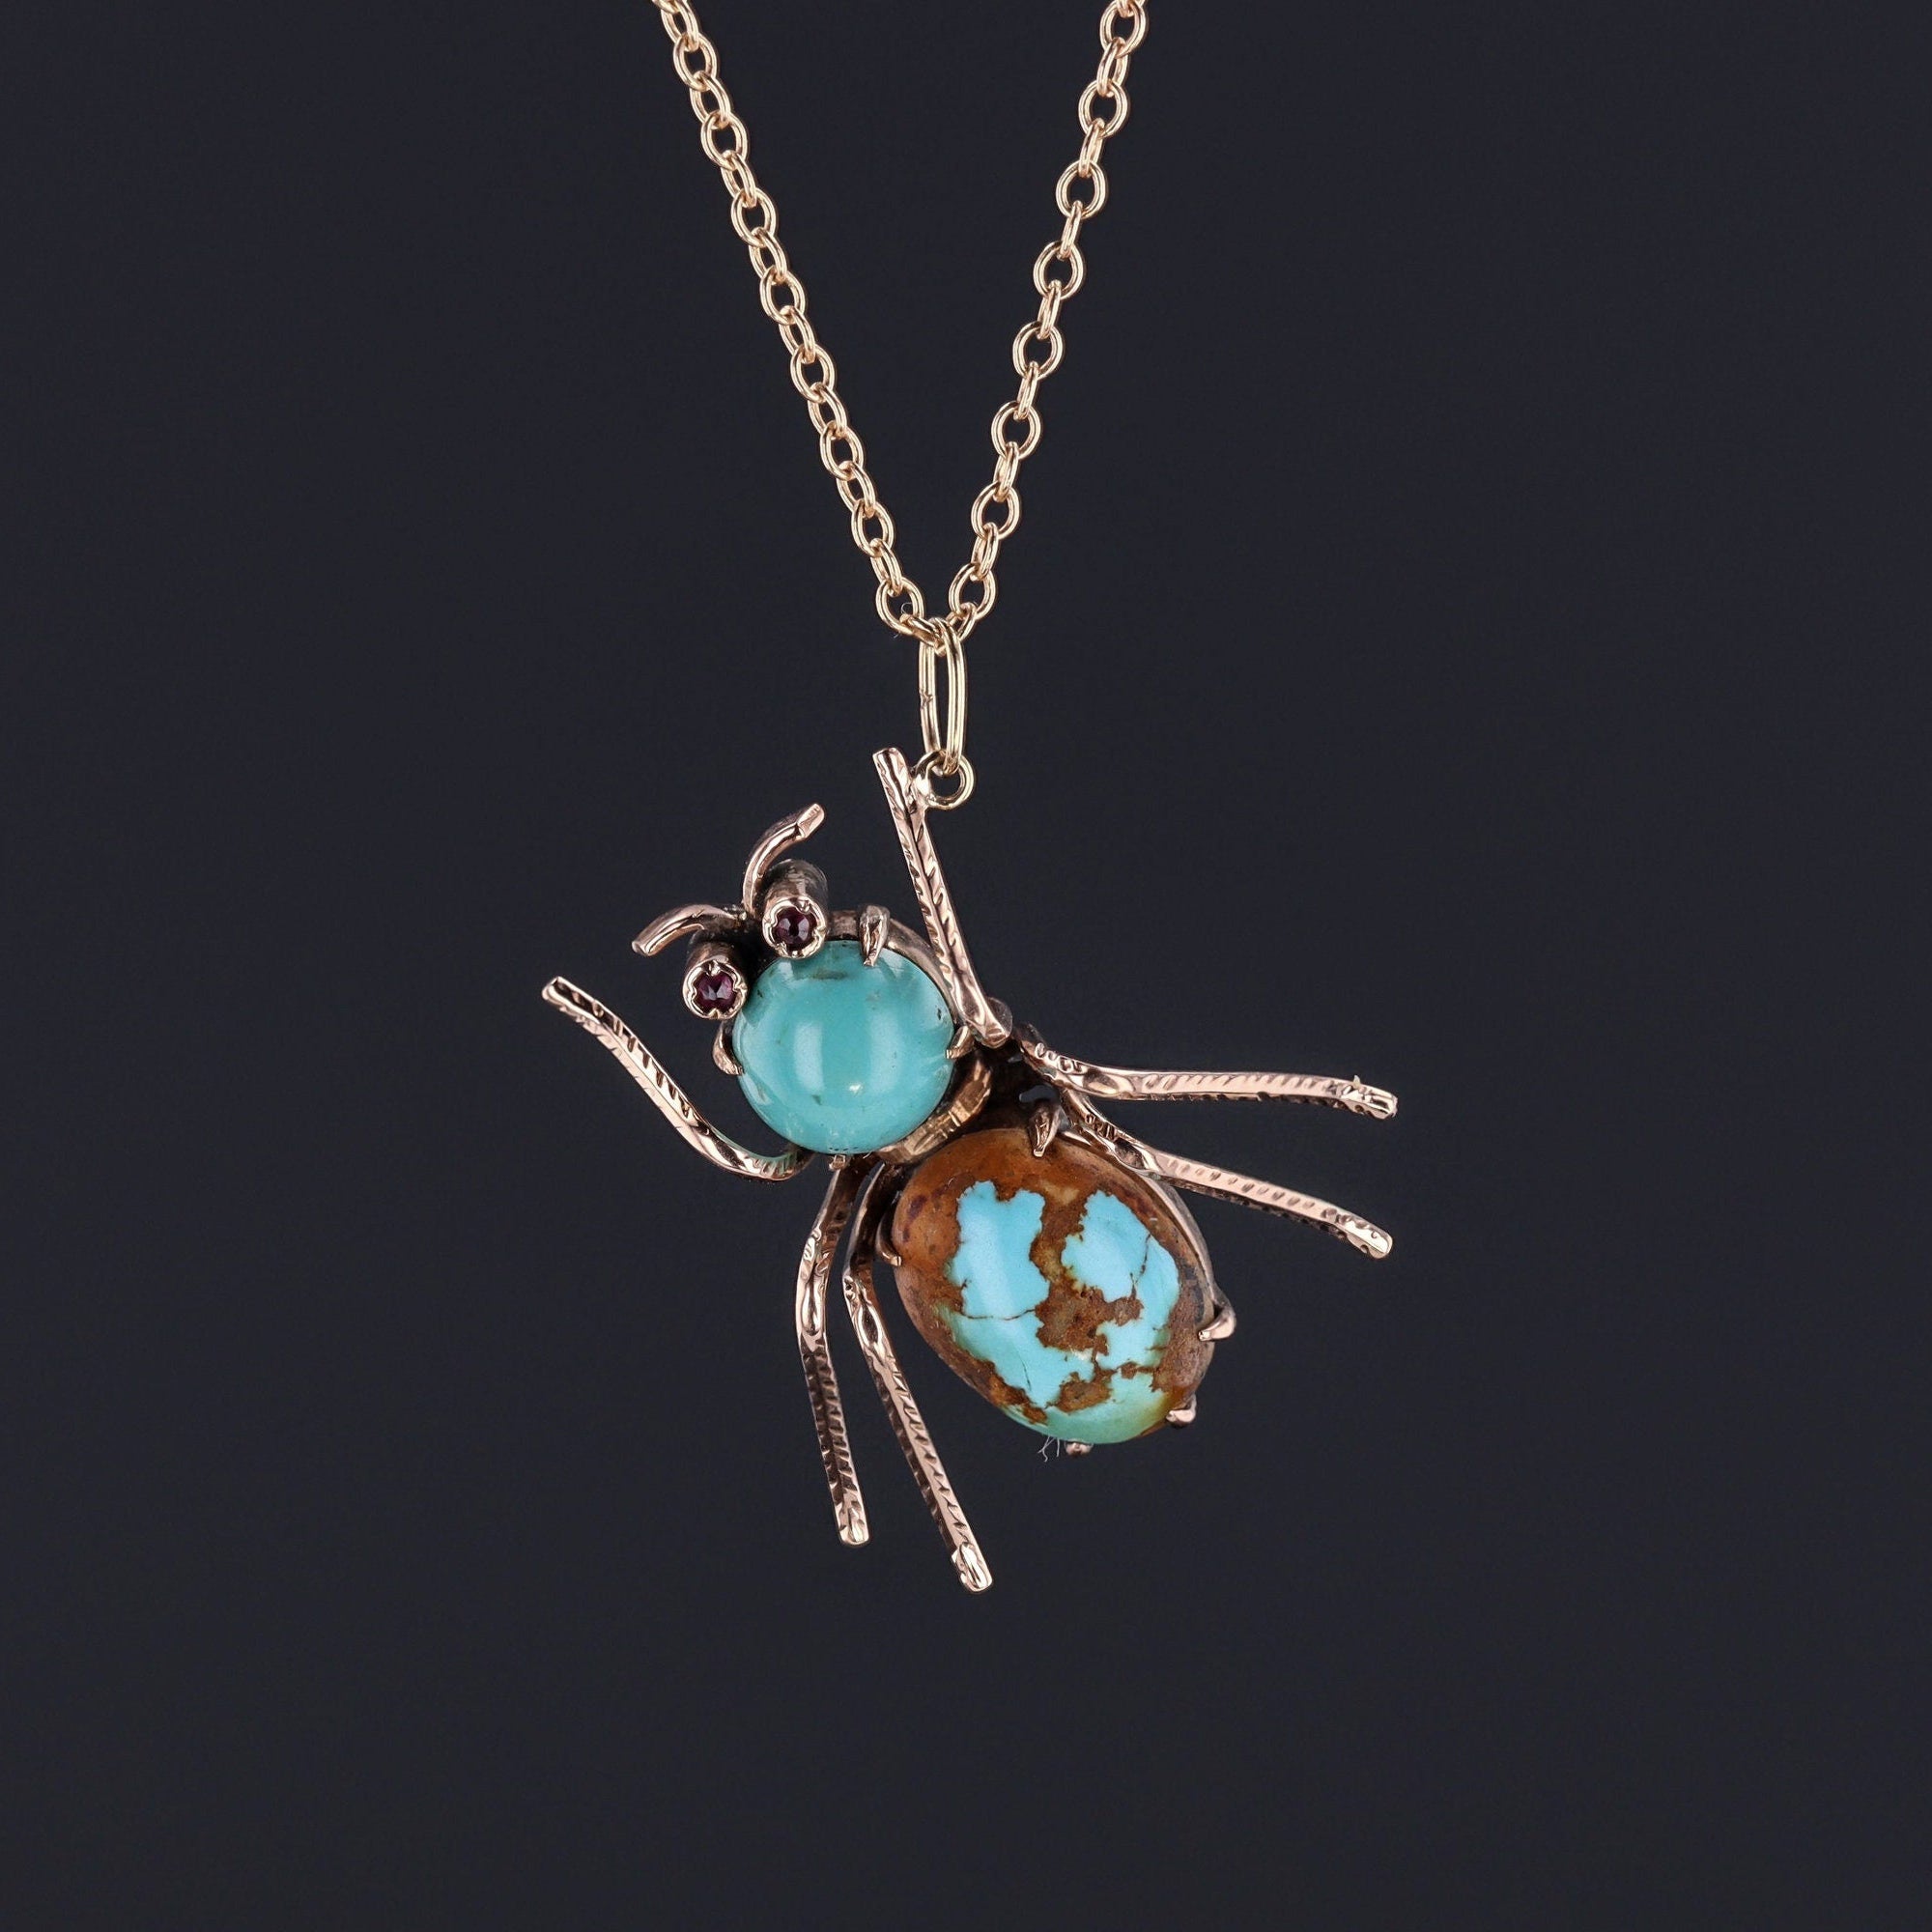 Vintage Insect Pendant | Turquoise Bug Pendant 